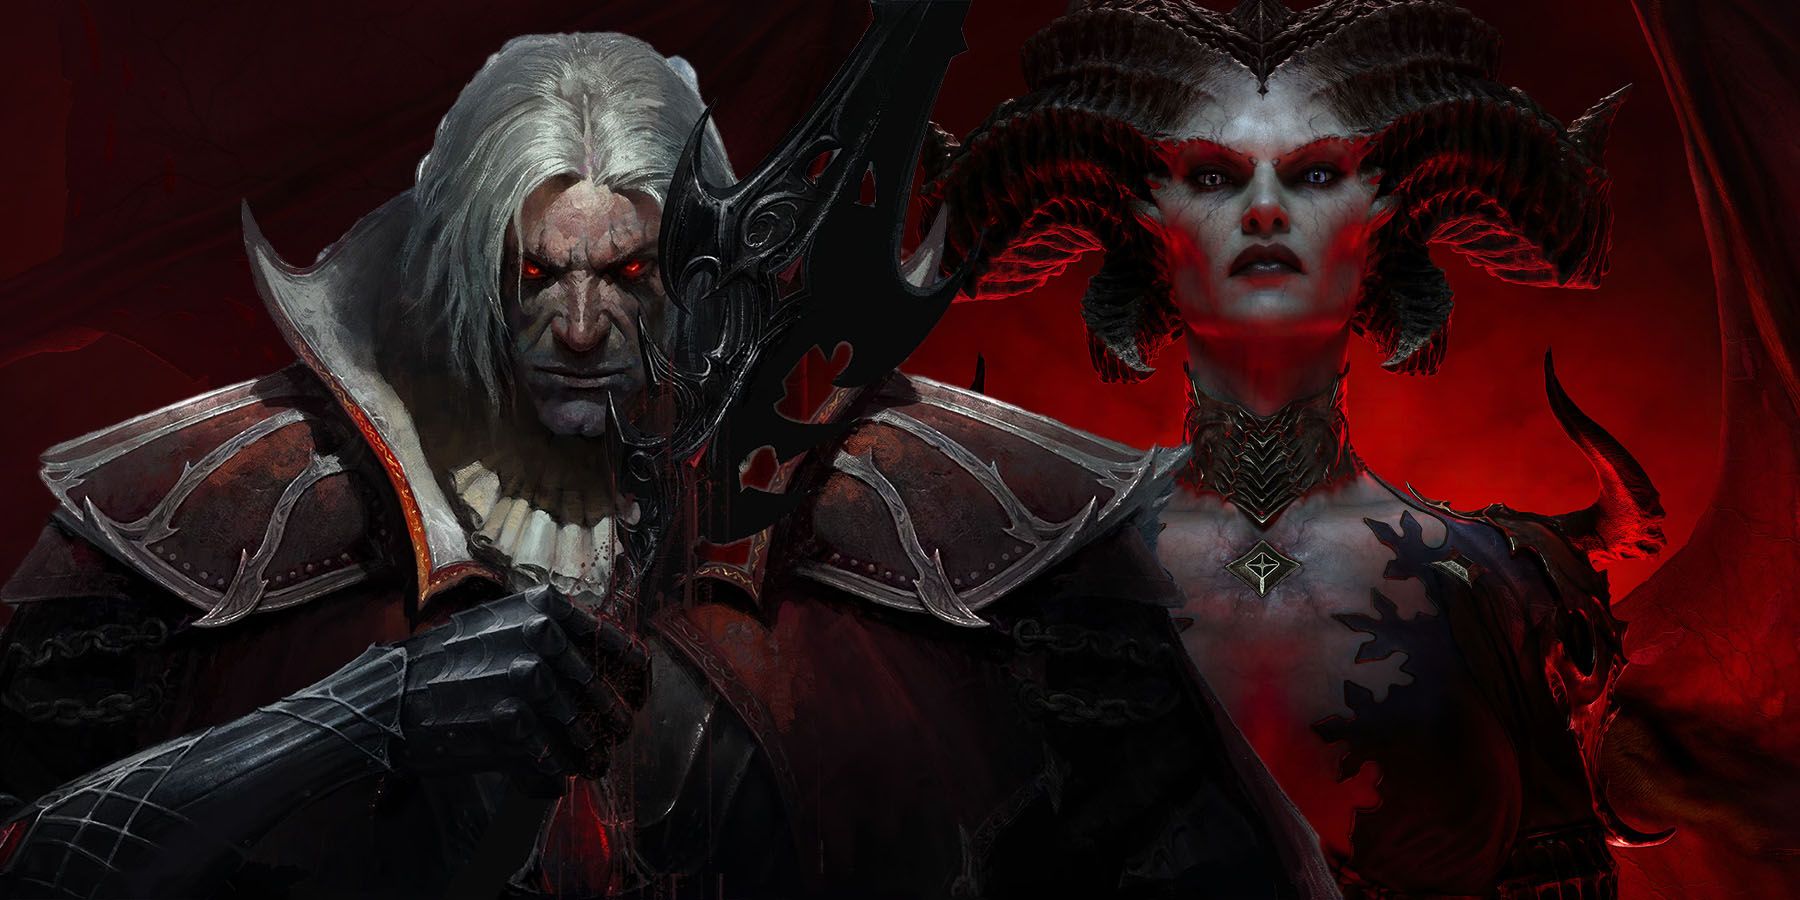 Diablo Immortal's Blood Knight Would Be a Match Made in Heaven for